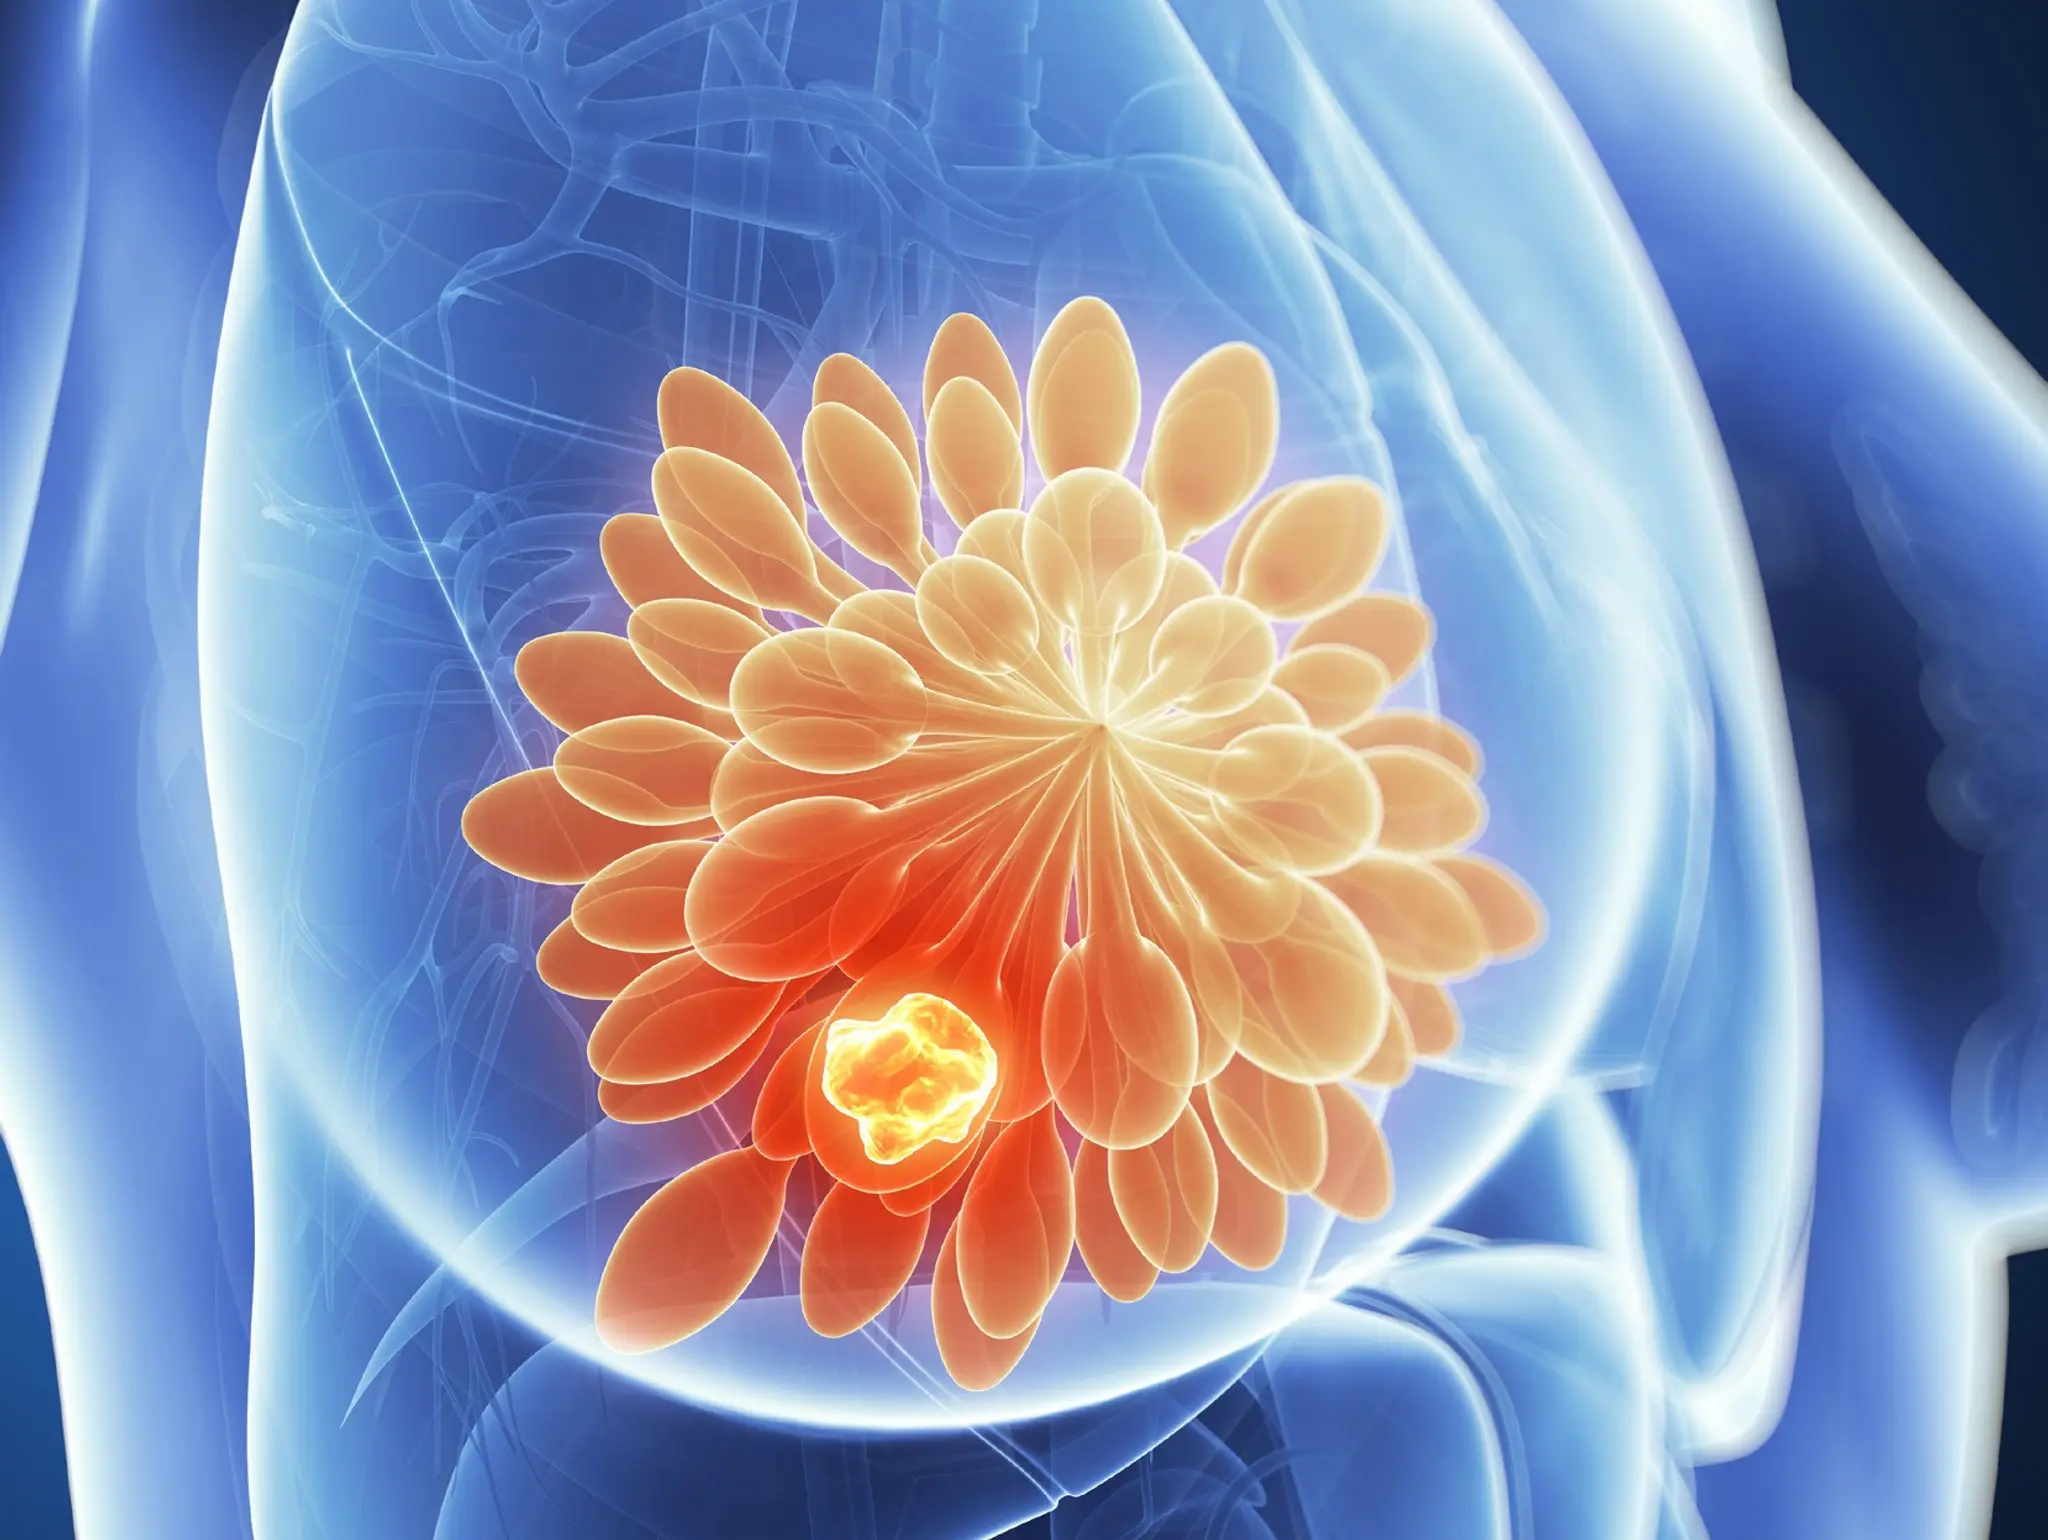 AstraZeneca’s Truqap plus Faslodex approved by FDA for treatment of breast cancer